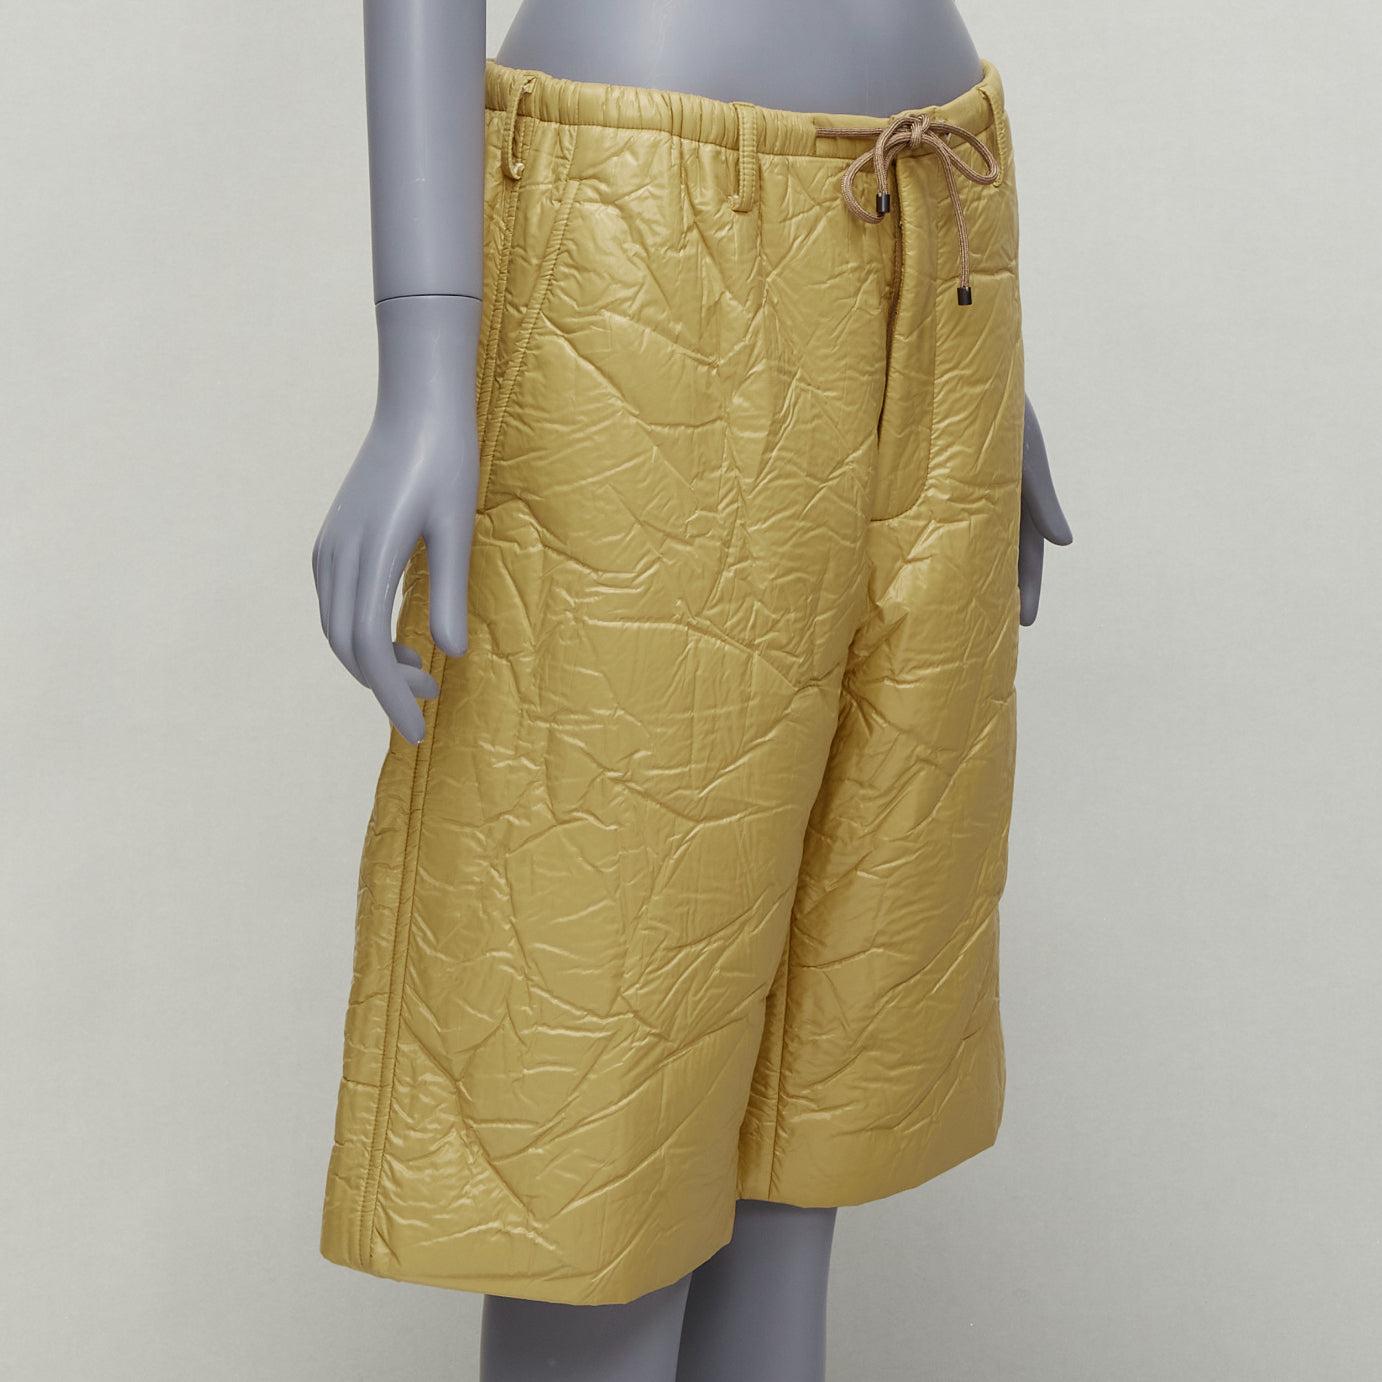 DRIES VAN NOTEN khaki crinkle padded drawstring wide leg half shorts IT46 S
Reference: NKLL/A00054
Brand: Dries Van Noten
Material: Polyester, Blend
Color: Khaki
Pattern: Solid
Closure: Zip Fly
Lining: Khaki
Made in: Bulgaria

CONDITION:
Condition: